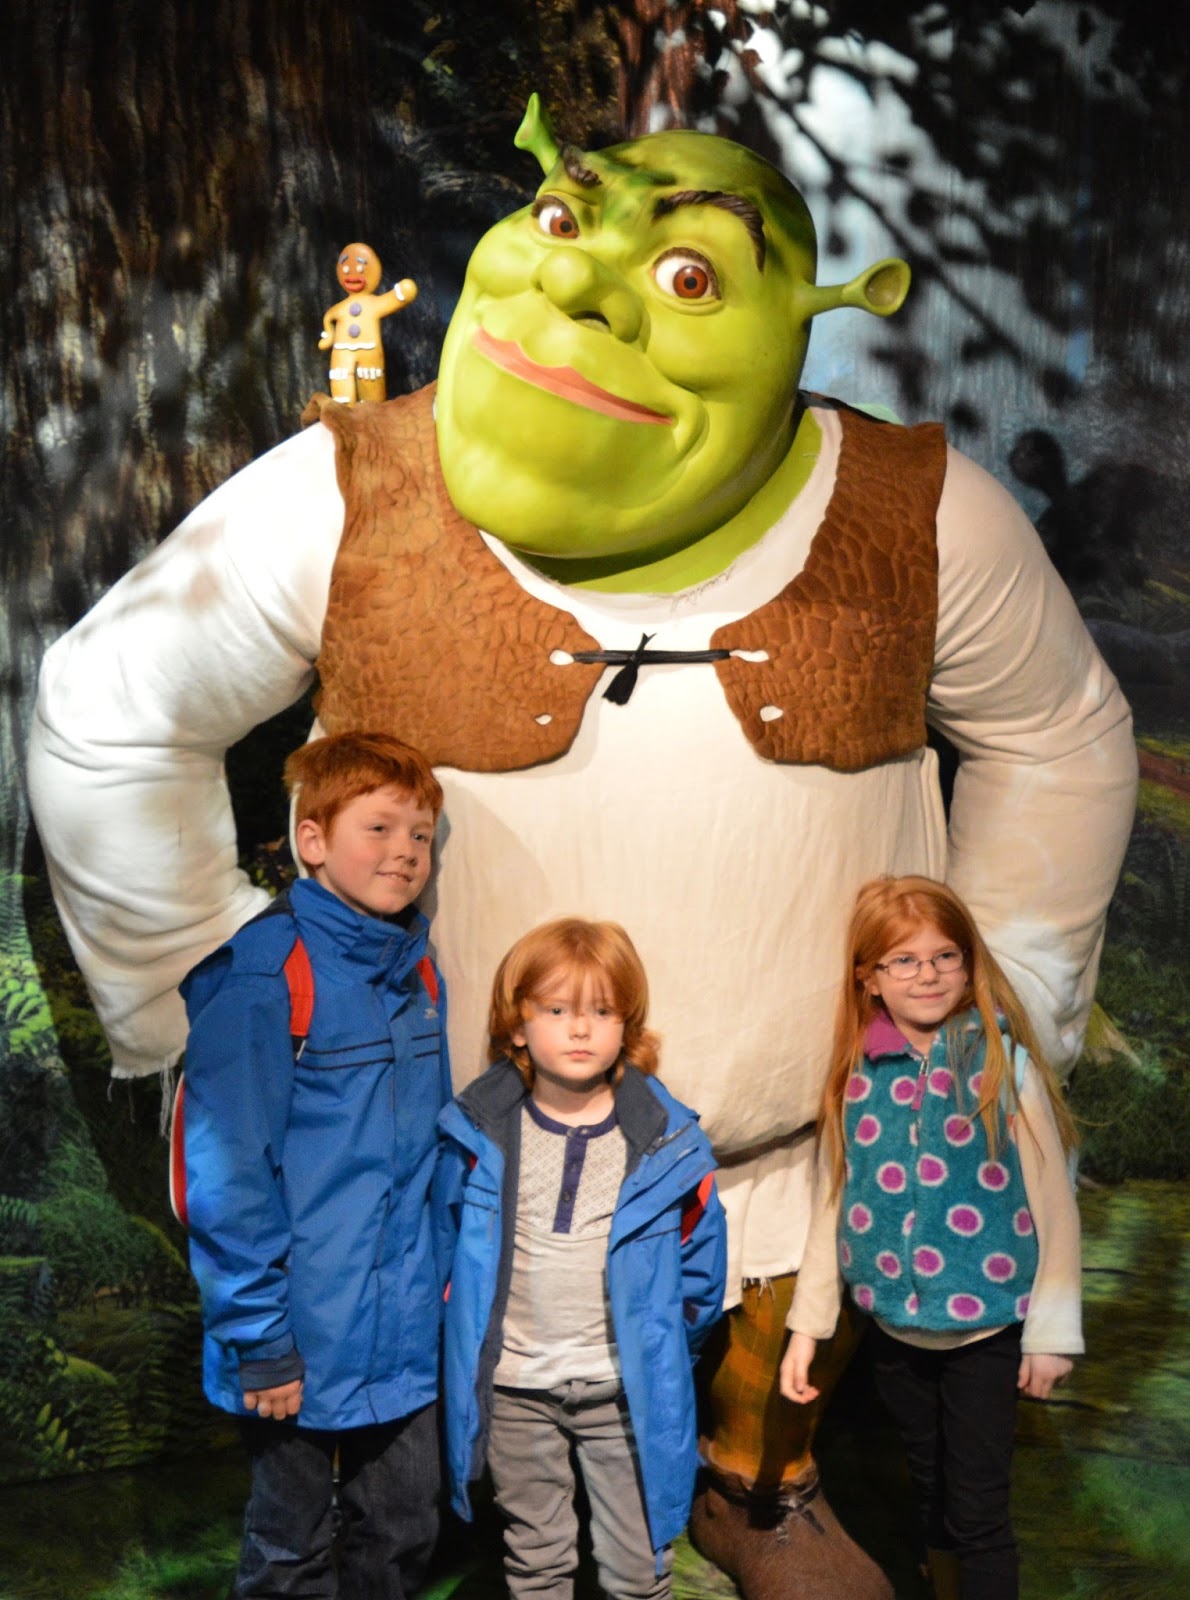 Madame Tussauds London including Star Wars - A Review | North East Family Fun